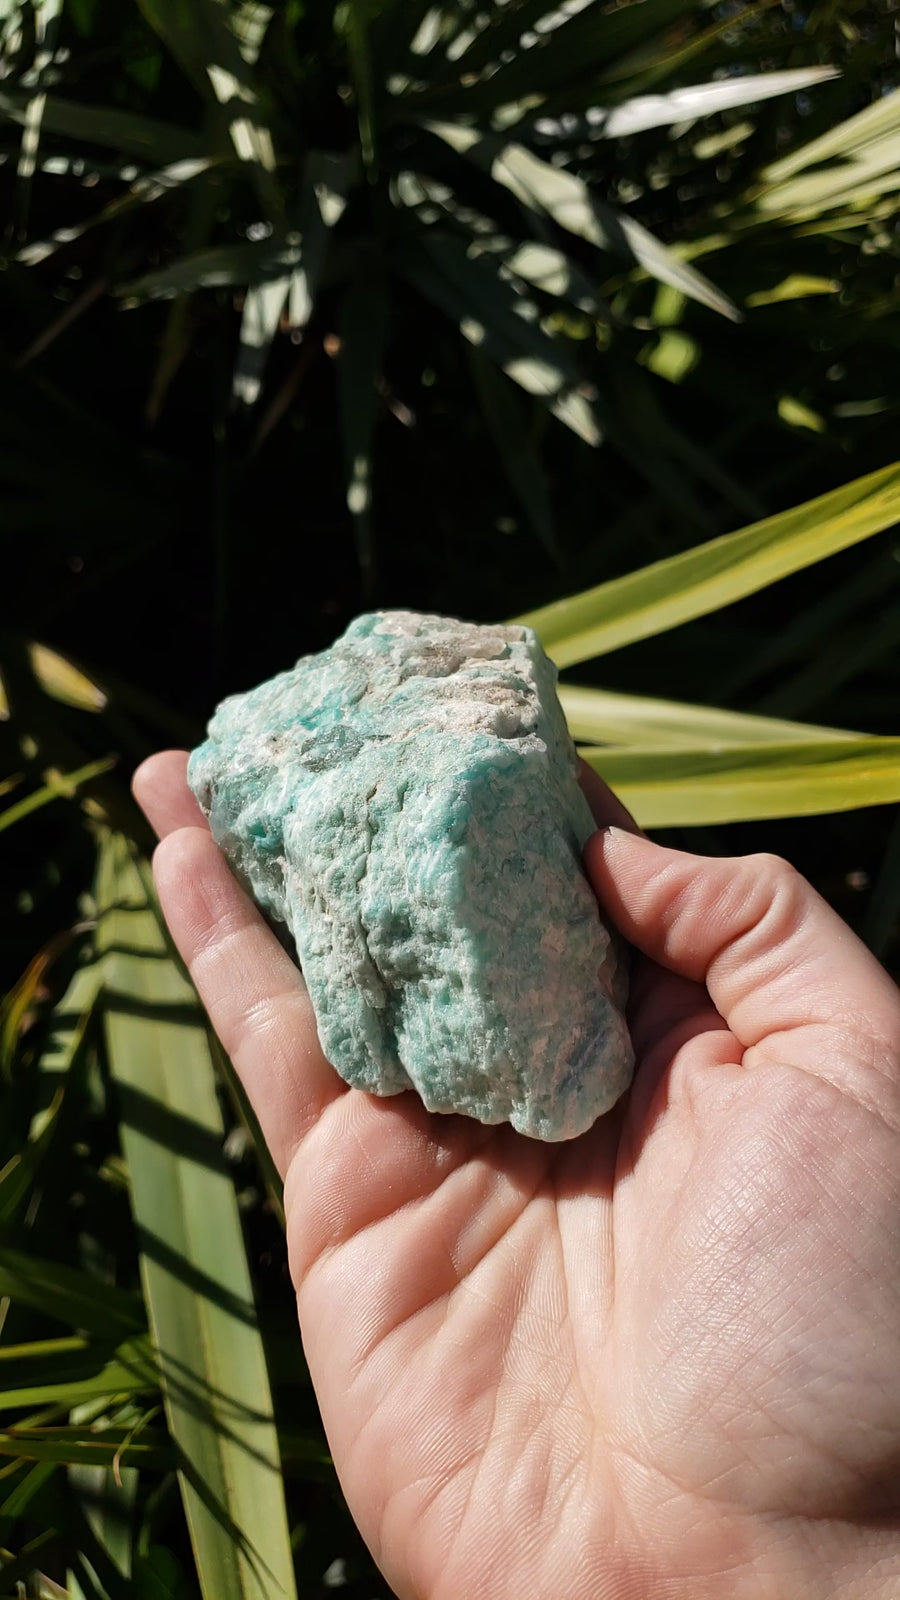 Video of rough amazonite in hand, showing of various sides